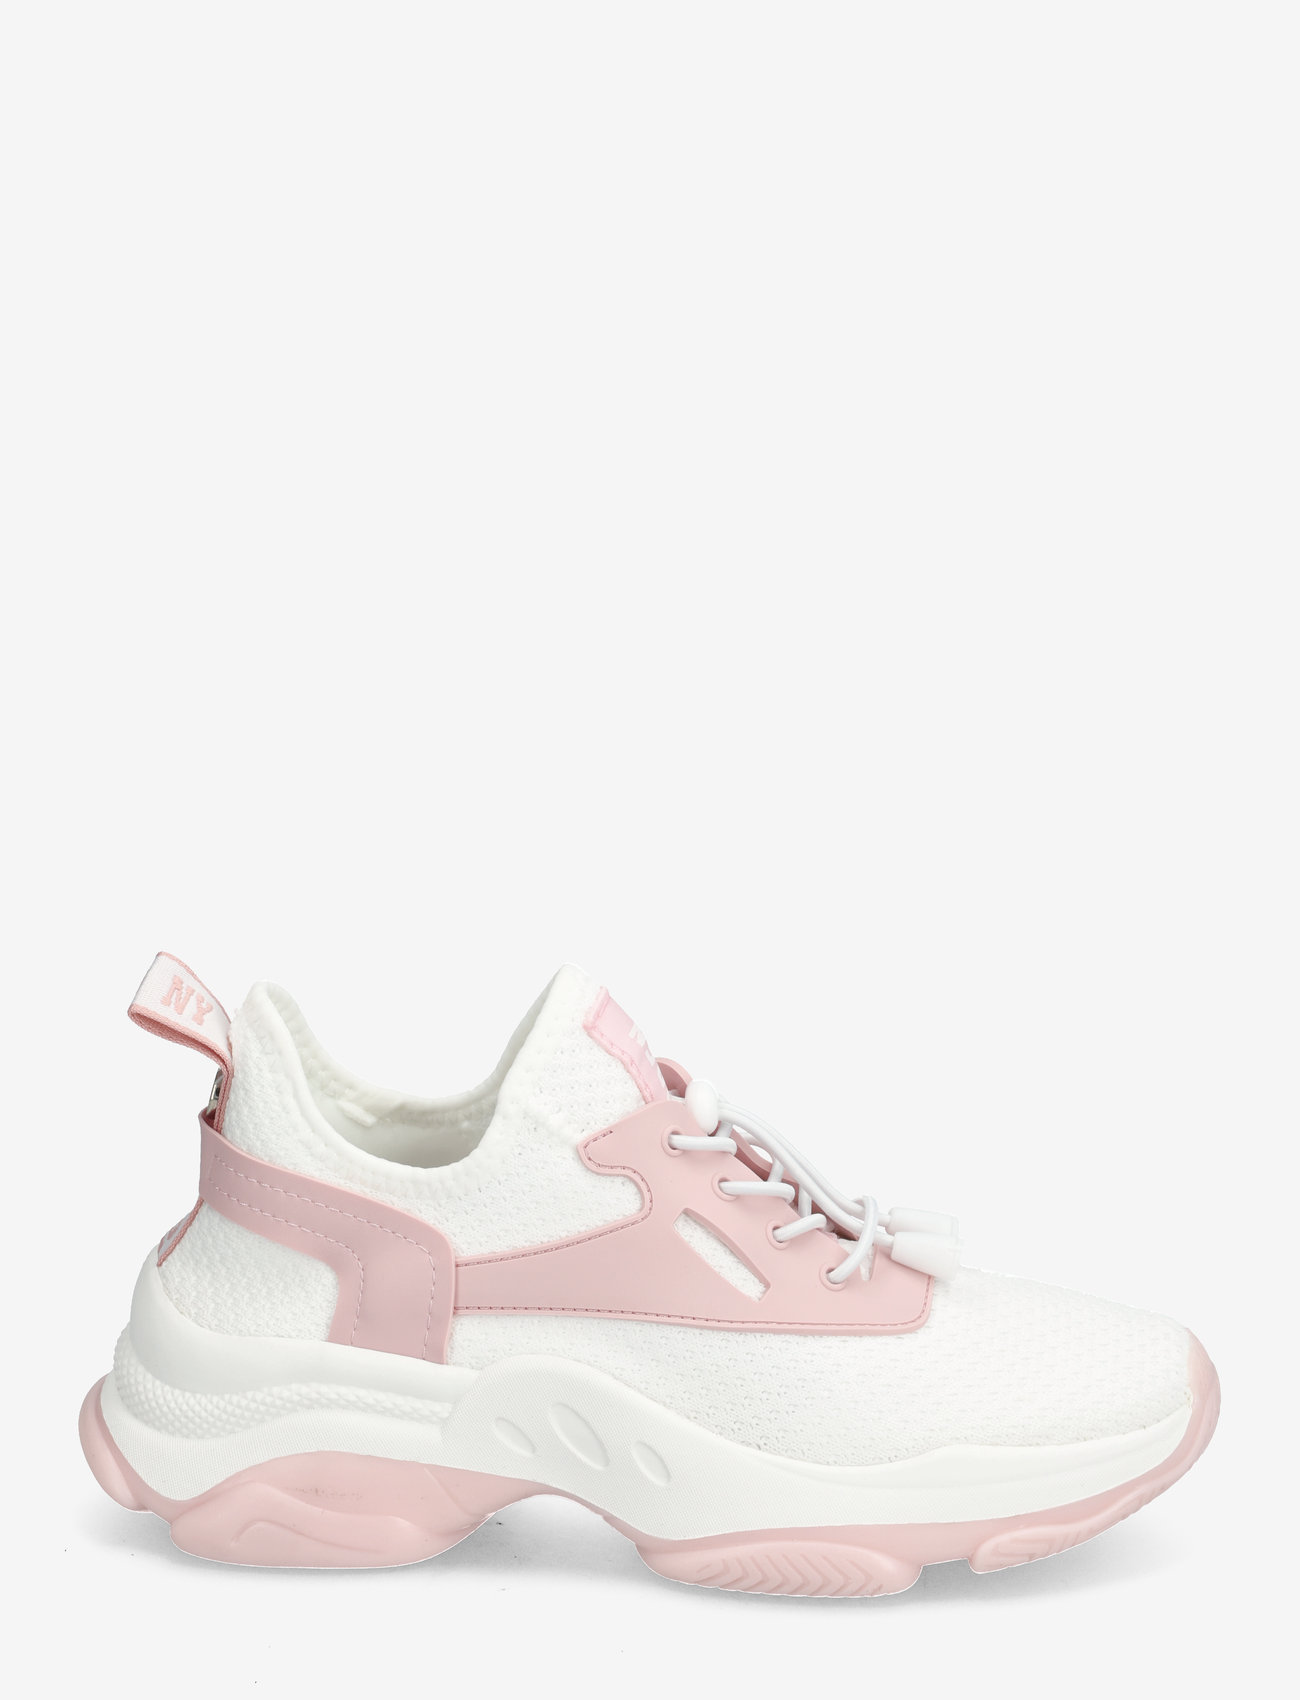 Steve Madden - Match-E Sneaker - low top sneakers - white/pink - 1